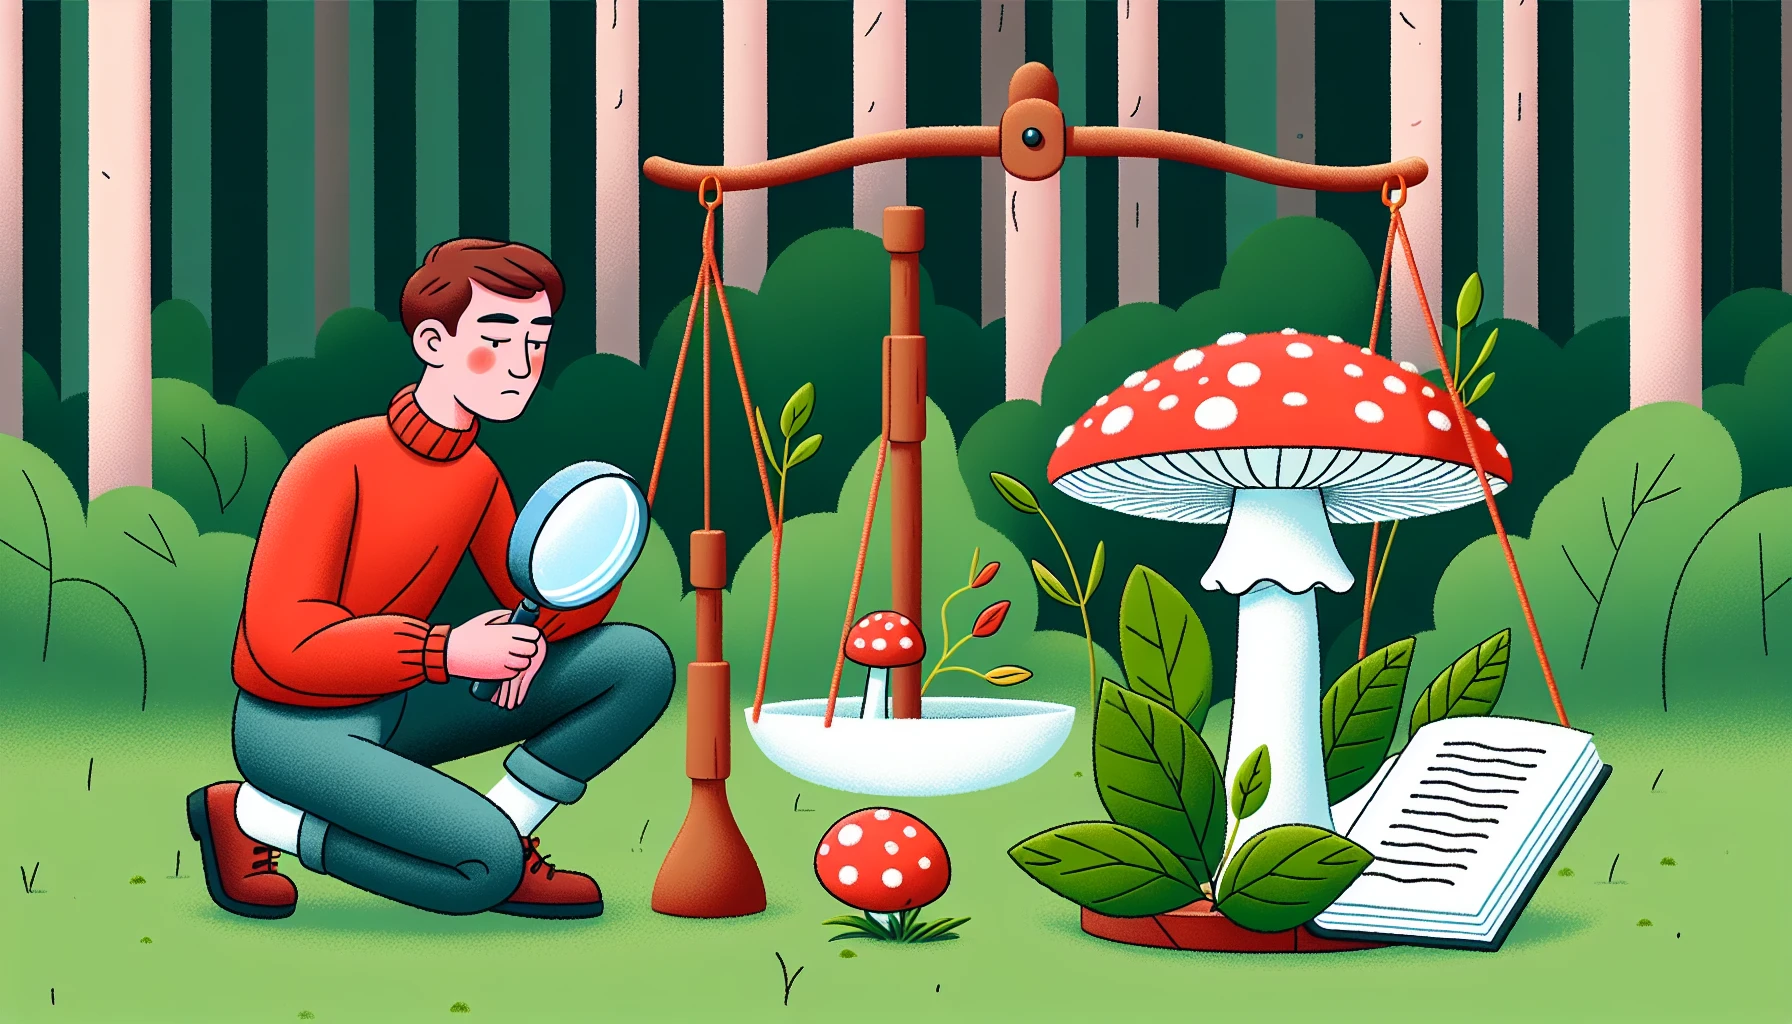 Legal status and ethical considerations of Amanita Muscaria